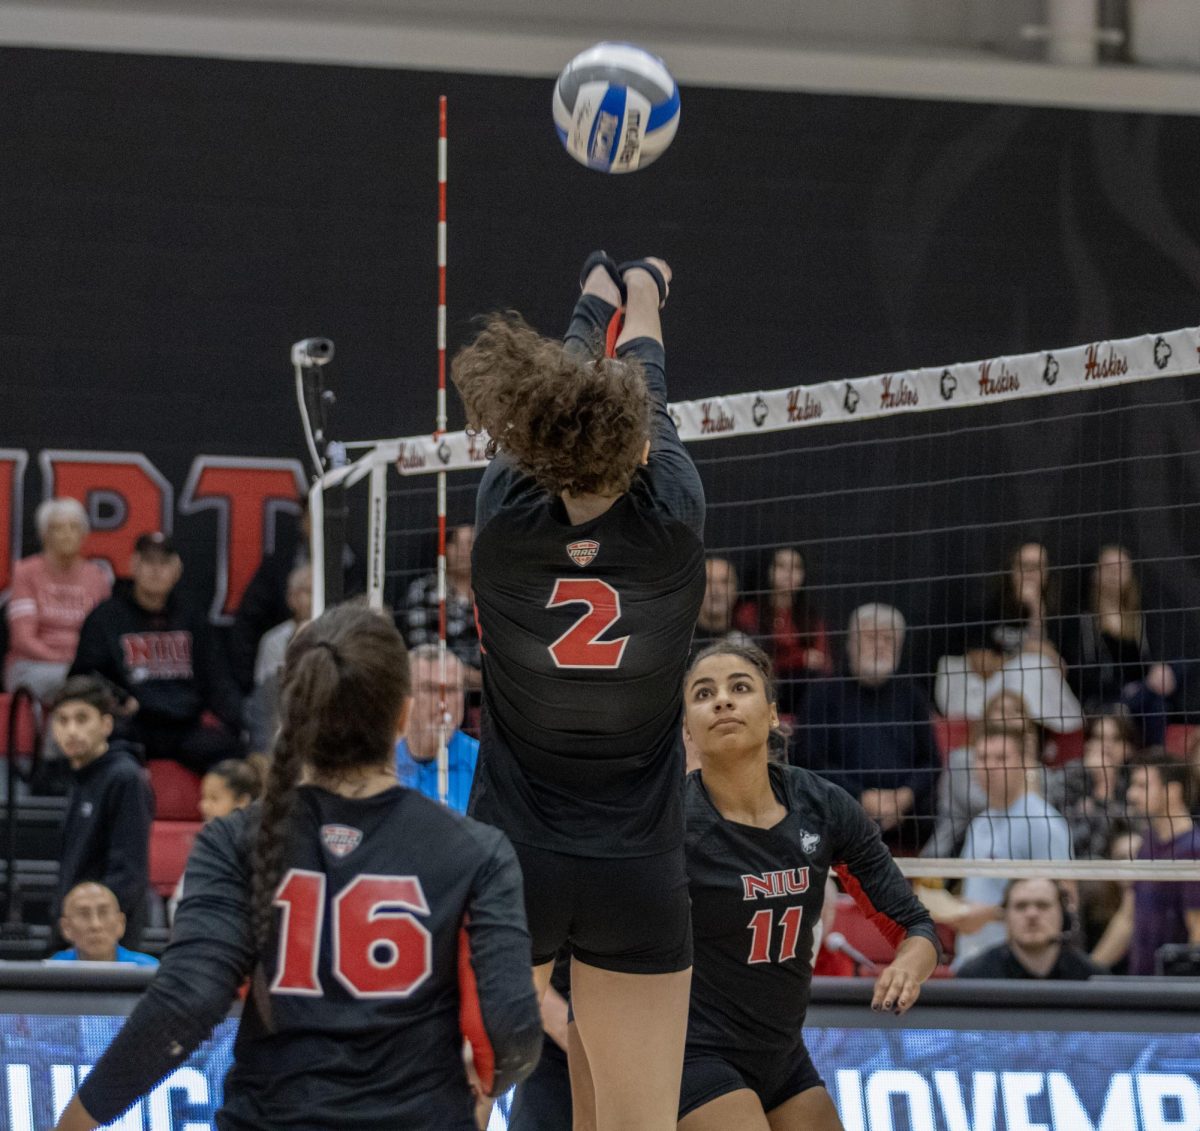 NIU+graduate+student+right+side+hitter+Isabelle+Percoco+hits+the+ball+during+a+rally+in+the+Oct.+27+match+against+the+University+of+Akron.+The+Huskies+fell+in+three+sets+as+one+of+their+seven+consecutive+defeats+entering+Friday%E2%80%99s+series-opener+against+Ball+State+University.+%28Tim+Dodge+%7C+Northern+Star%29